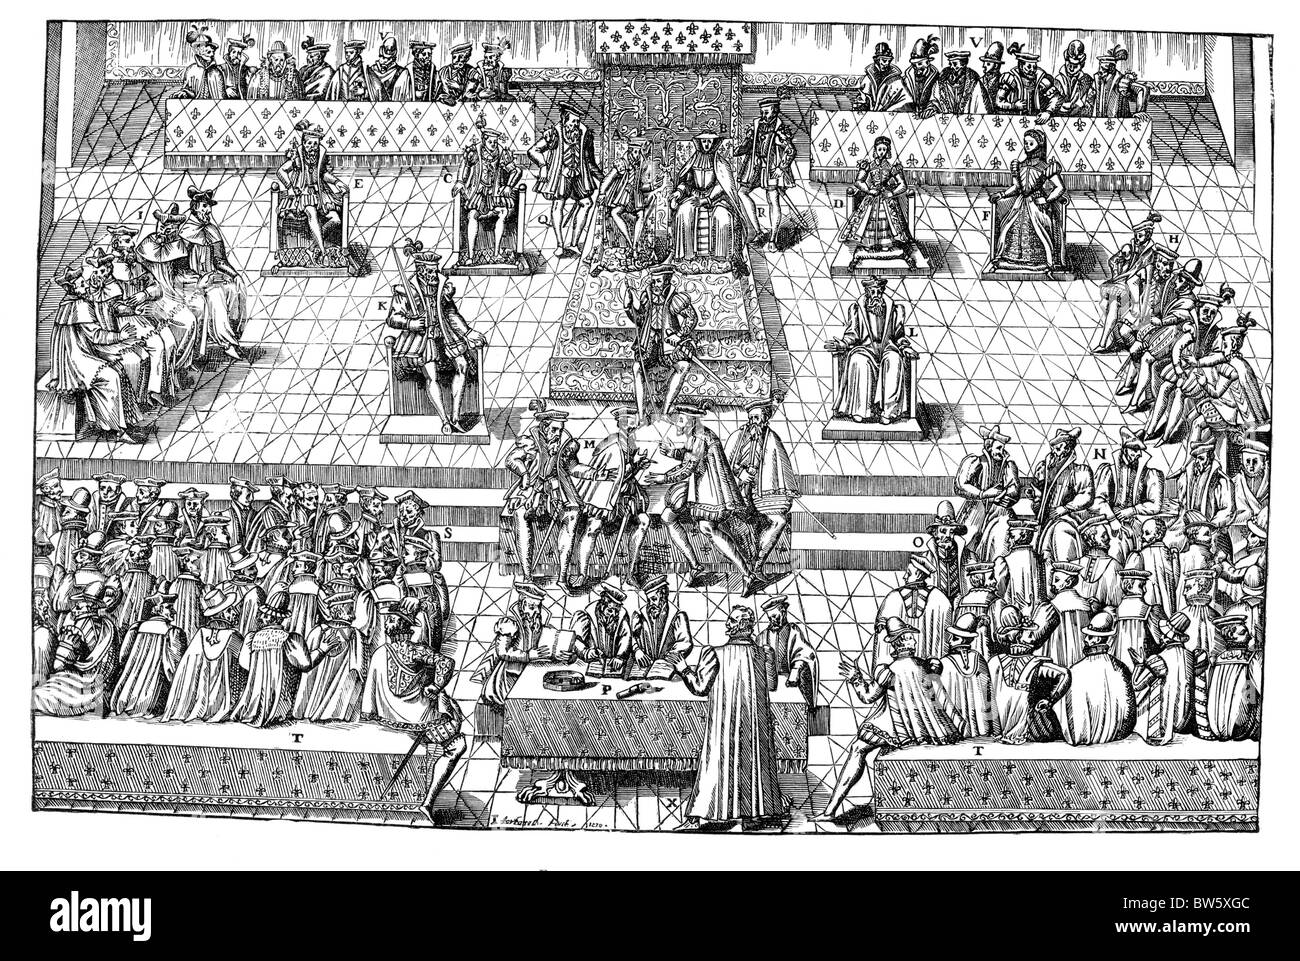 The States General held in Orleans, France in 1561; Black and White Illustration; Stock Photo